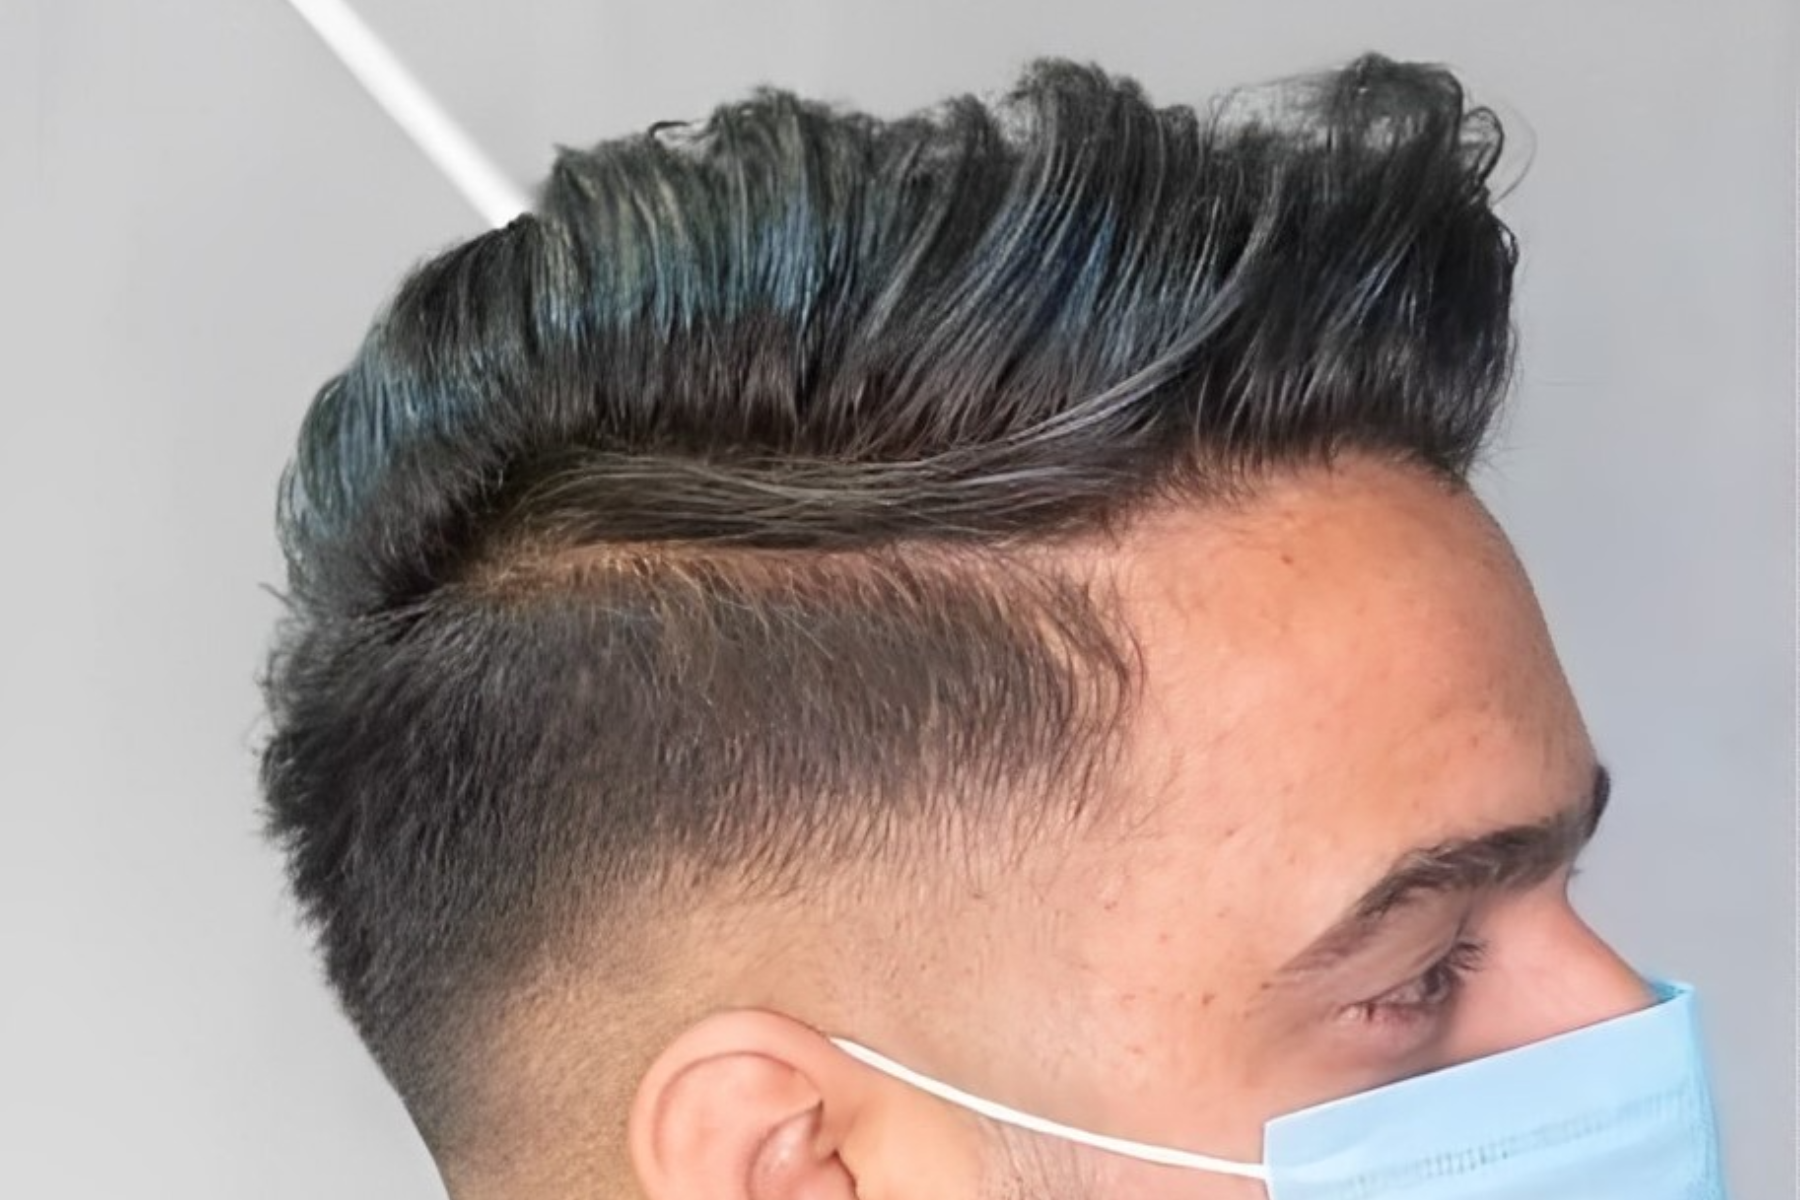 A man with a blue mask is rocking a side-swept haircut